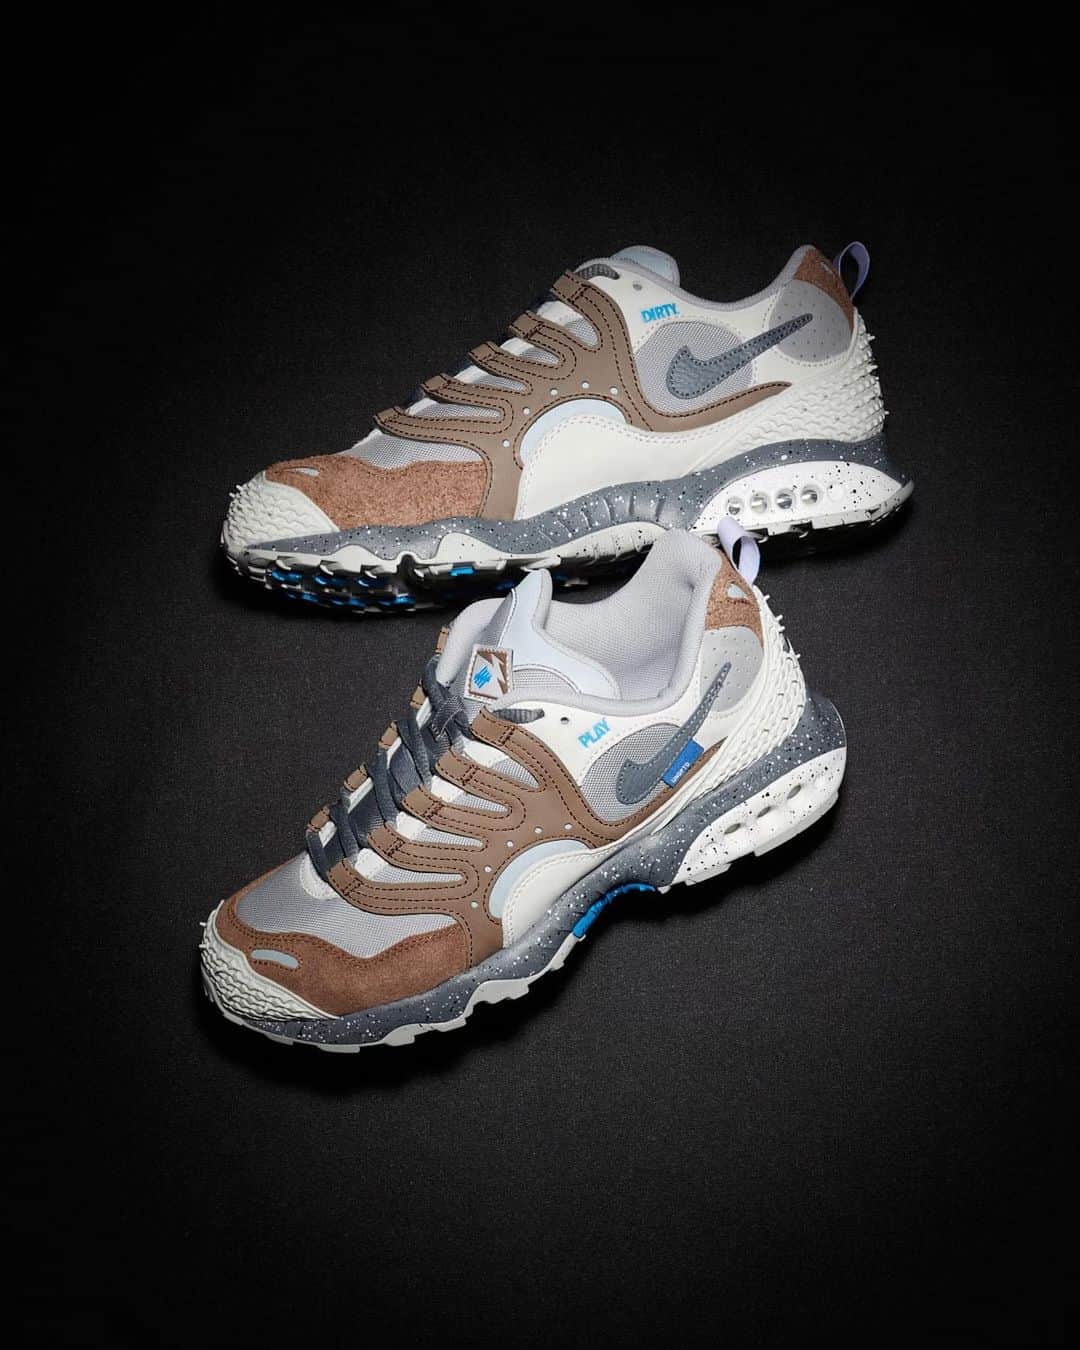 UNDFTDのインスタグラム：「UNDEFEATED x Nike Air Terra Humara ‘Archaeo Brown’  Expanding on their long-standing partnership, UNDEFEATED and Nike teamed up in reworking two new iterations of the Air Terra Humara. Both colorways boast a reflective cage that houses a nubuck suede and ballistic cordura upper, sitting atop a speckled rubber midsole, outsole and air bag cage.   Subtle details compliment the shoe’s unique design - the debossed ‘Play Dirty’ lettering split across the medial and lateral sides of the shoe, along with reflective silver elements, the UNDFTD flag label attached to the matte leather Swoosh and a custom graphic sock liner.  Both pairs include an extra set of speckled laces and a custom 5-strike logo reimagined from the original Nike trail branding, a unique logo that appears as a woven label on the tongue and heel and is also showcased on the custom shoe box.  UNDEFEATED Exclusive  The UNDEFEATED x Nike Air Terra Humara in ‘Black’ and ‘Archaeo Brown’ will be available on Saturday, 12/2, exclusively at all UNDEFEATED Chapter Stores globally and Undefeated.com at 8am PST.  Shipping internationally, excluding Korea」